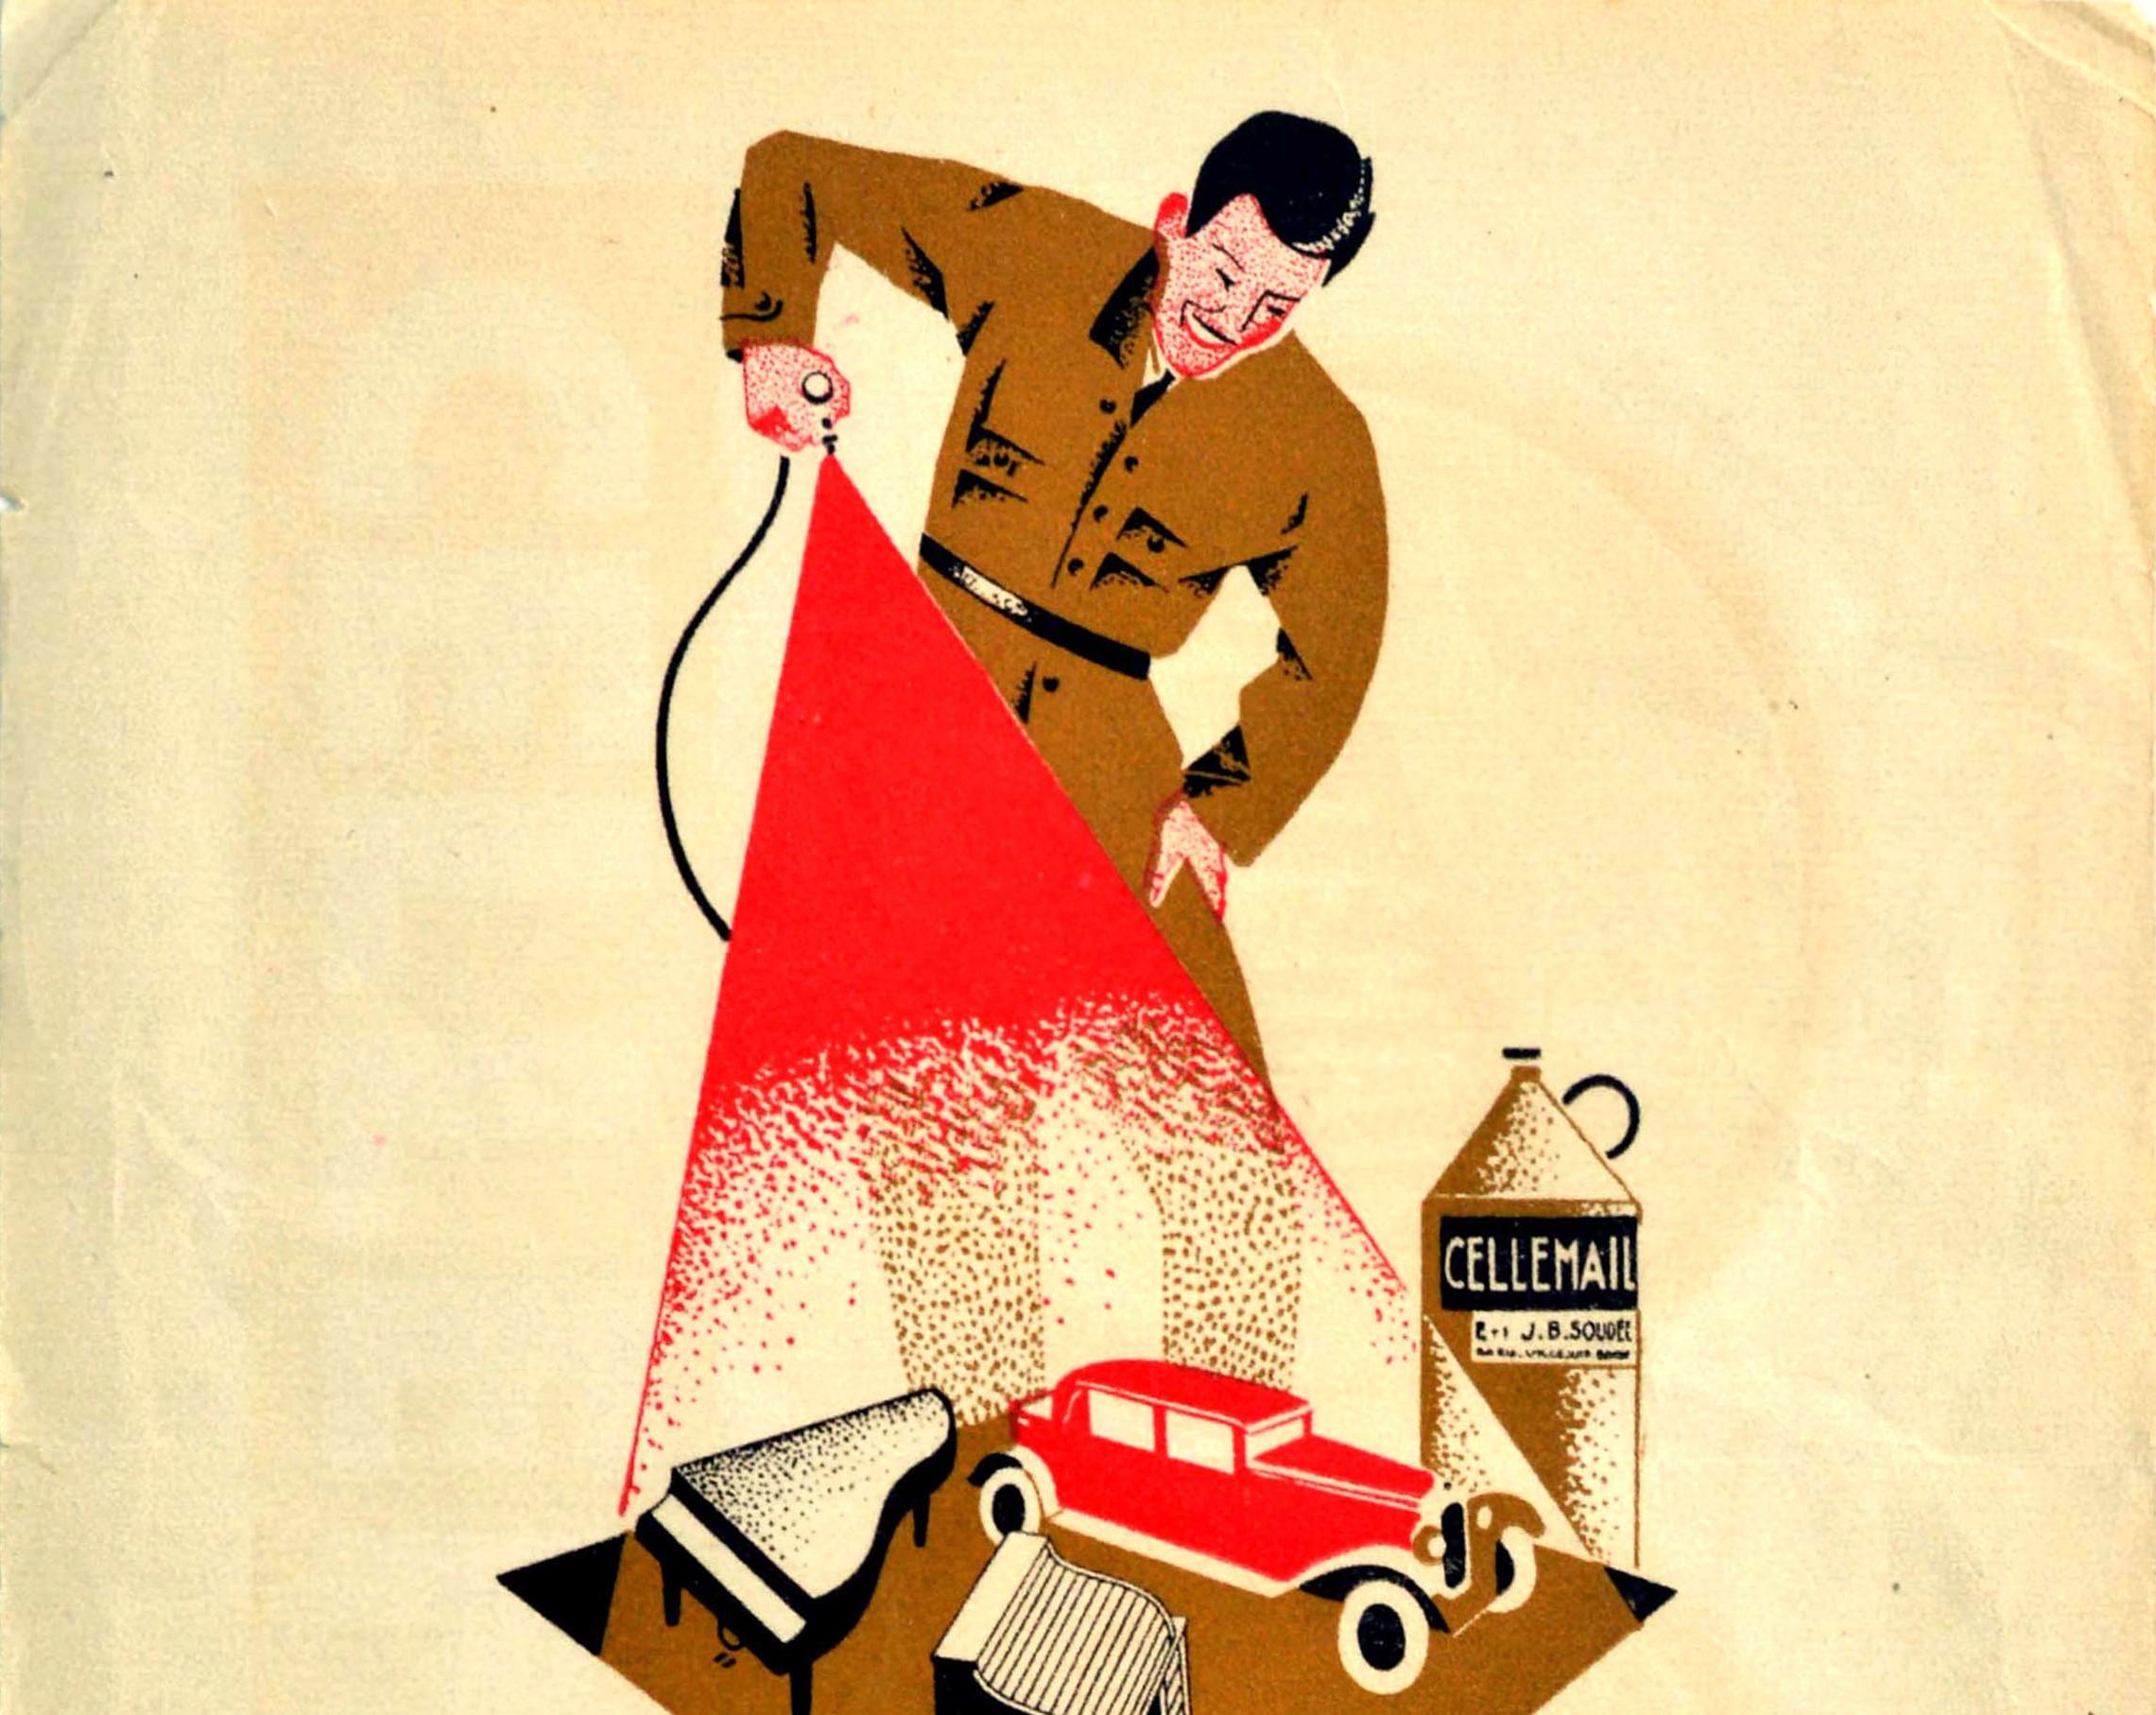 Original vintage advertising poster for Cellemail le premier email a froid Francais / Cellemail the best French cold enamel featuring a great design of a worker in brown overalls spraying a red coat of enamel over a car with a piano and a writing